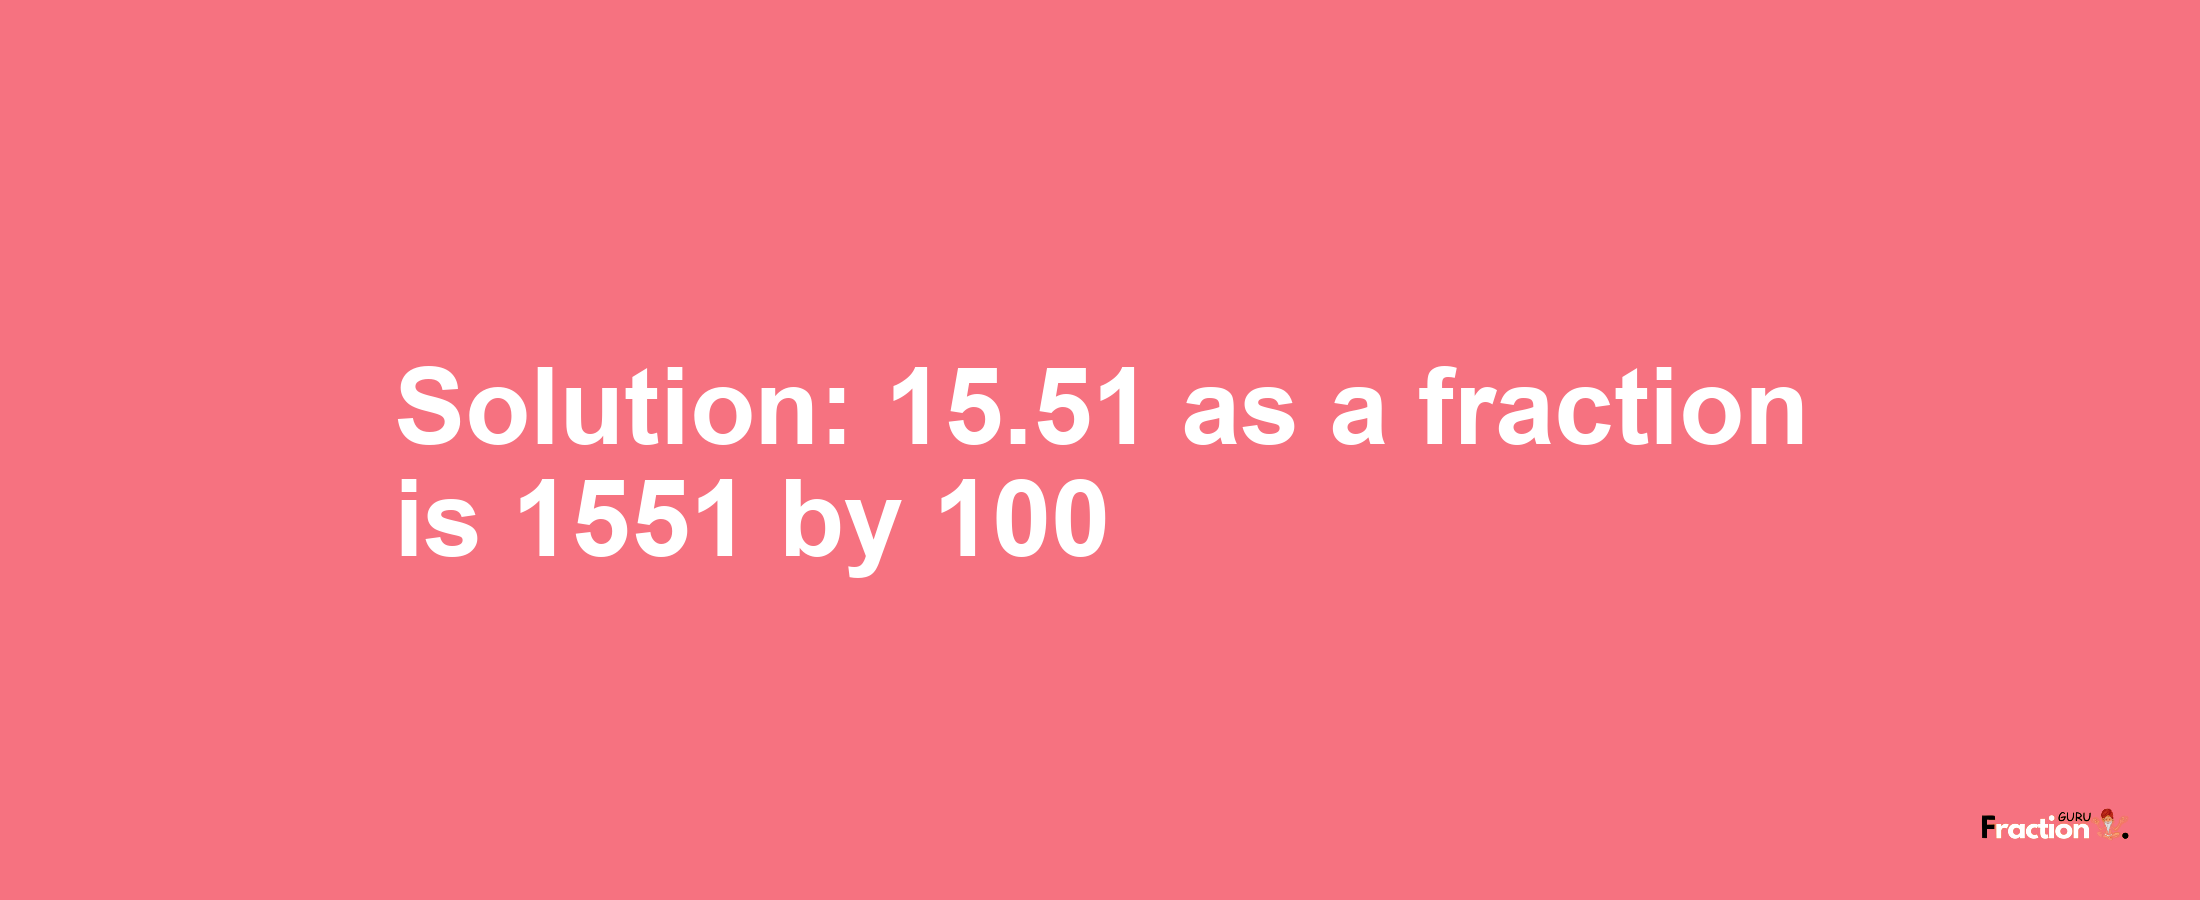 Solution:15.51 as a fraction is 1551/100